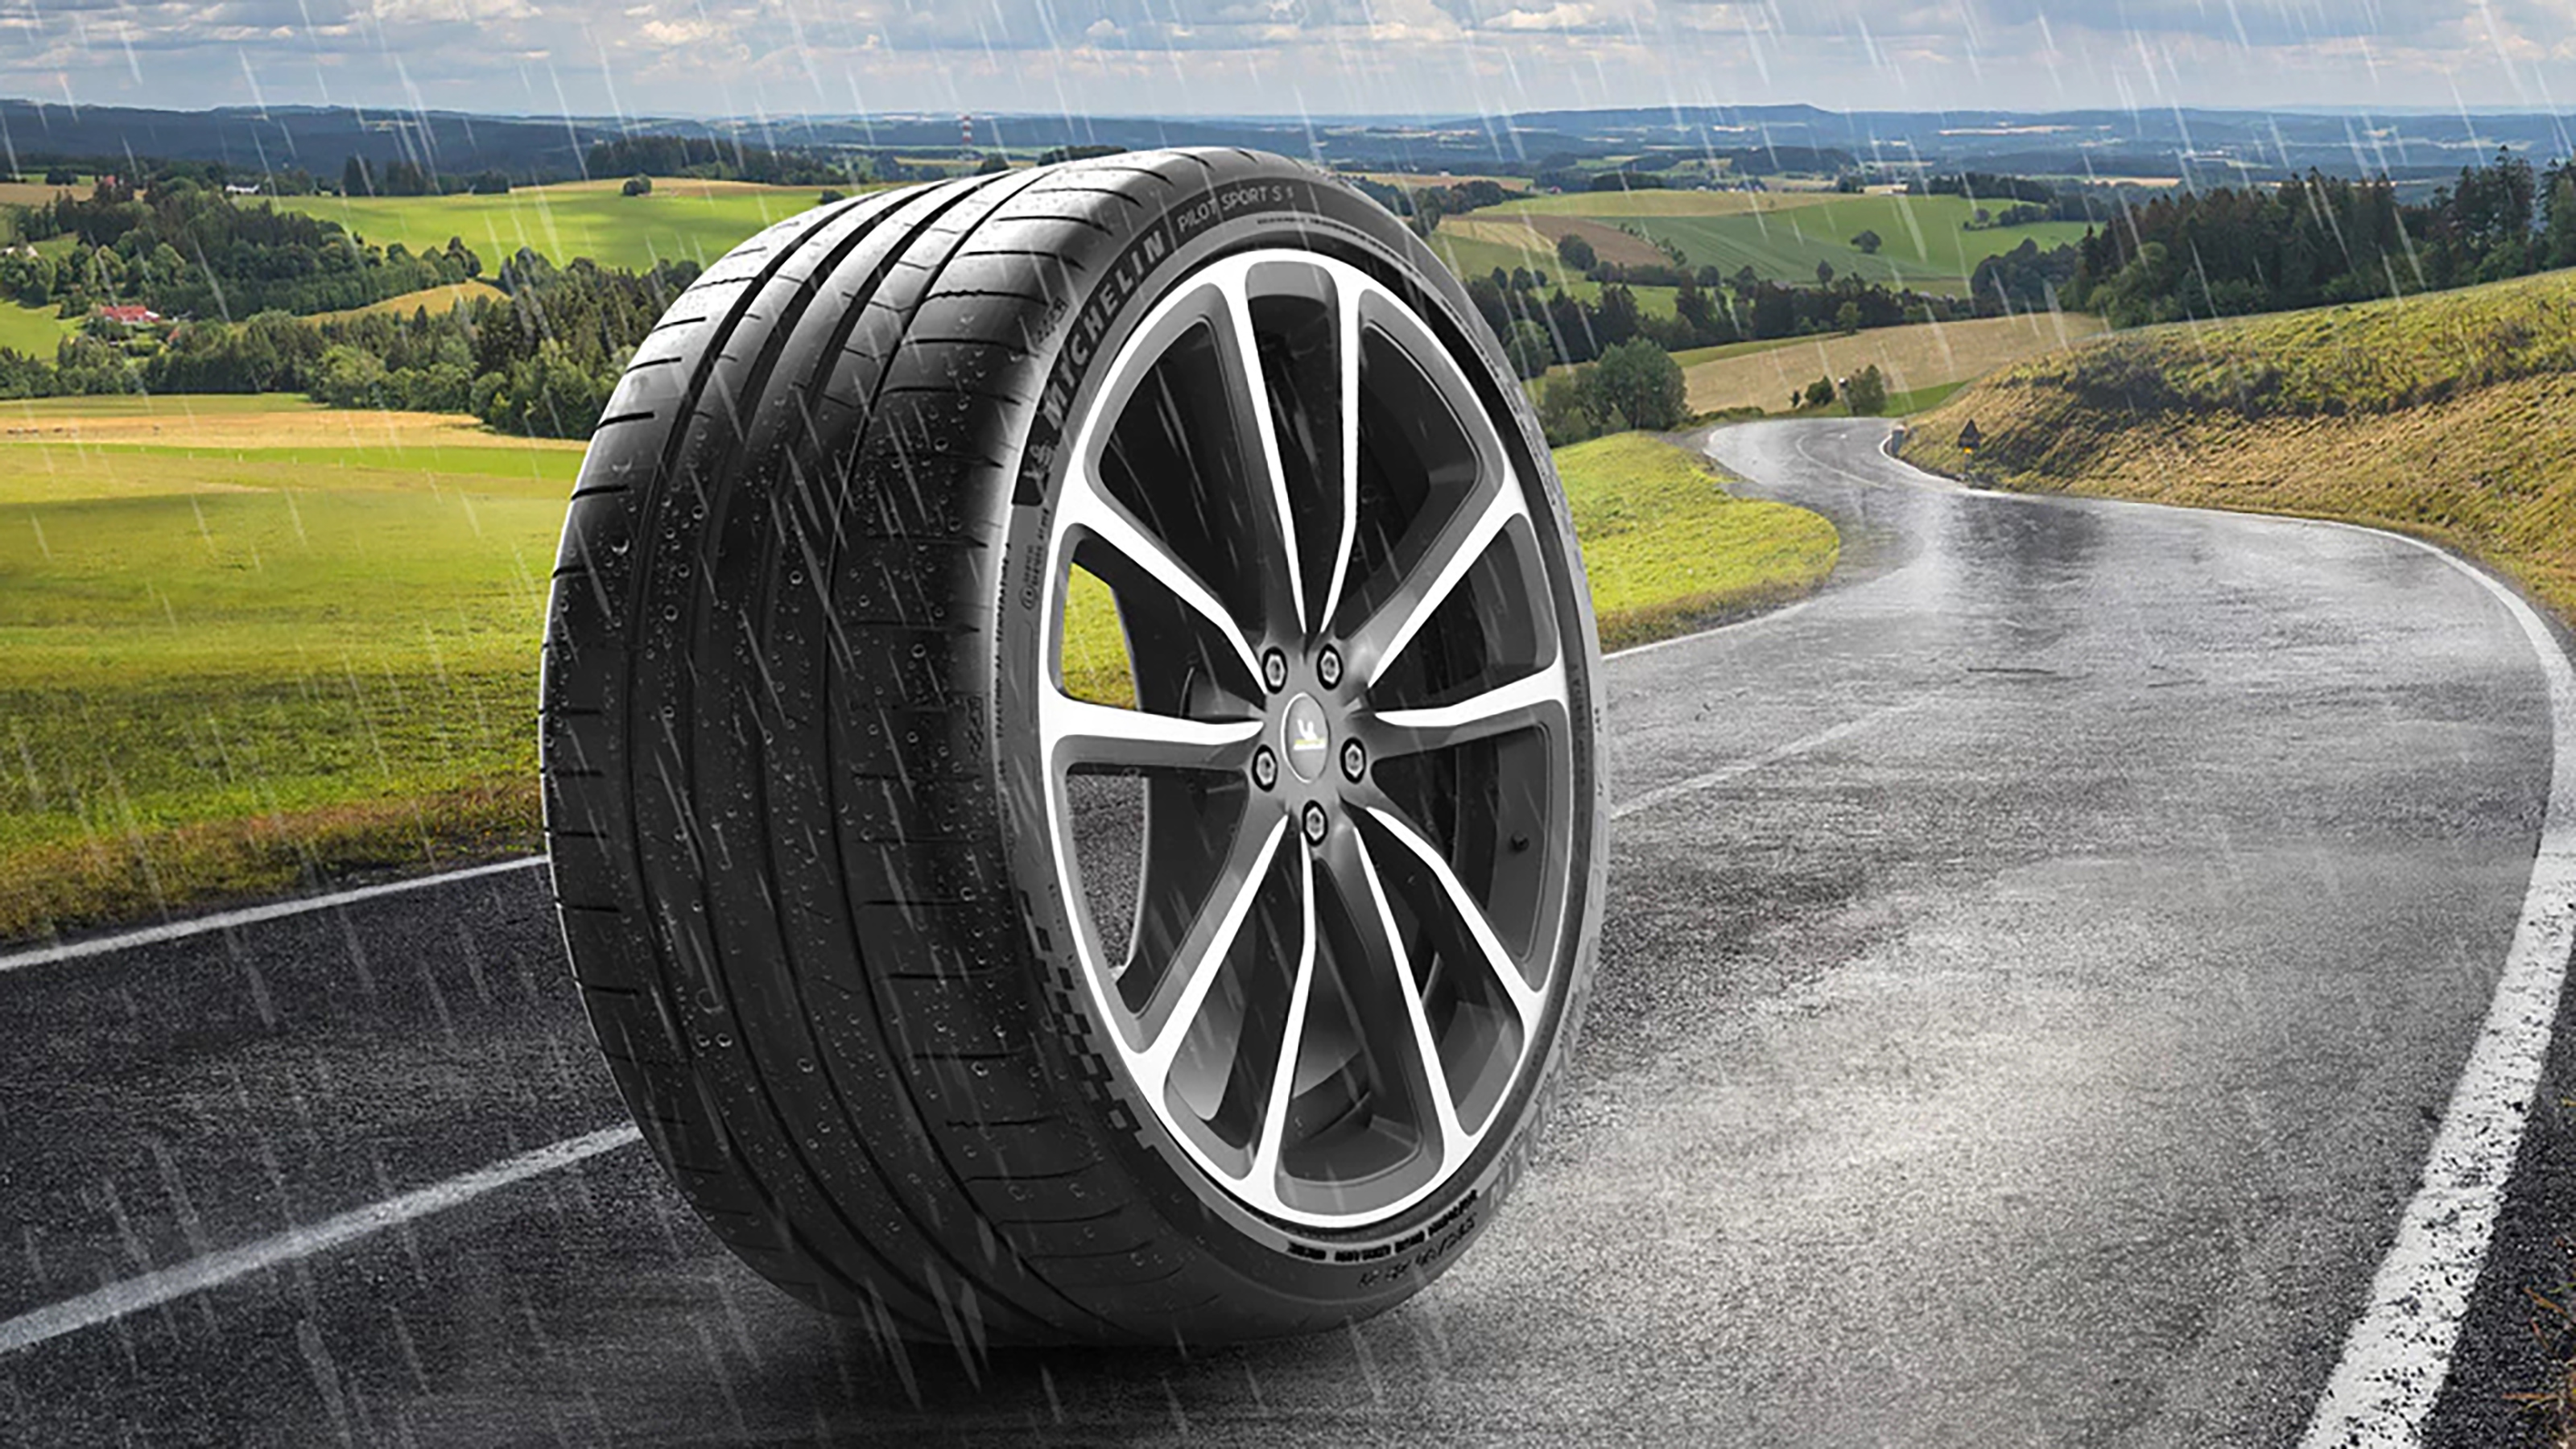 leef ermee Smerig toespraak New Michelin Pilot Sport S 5 high performance tyre launched | evo